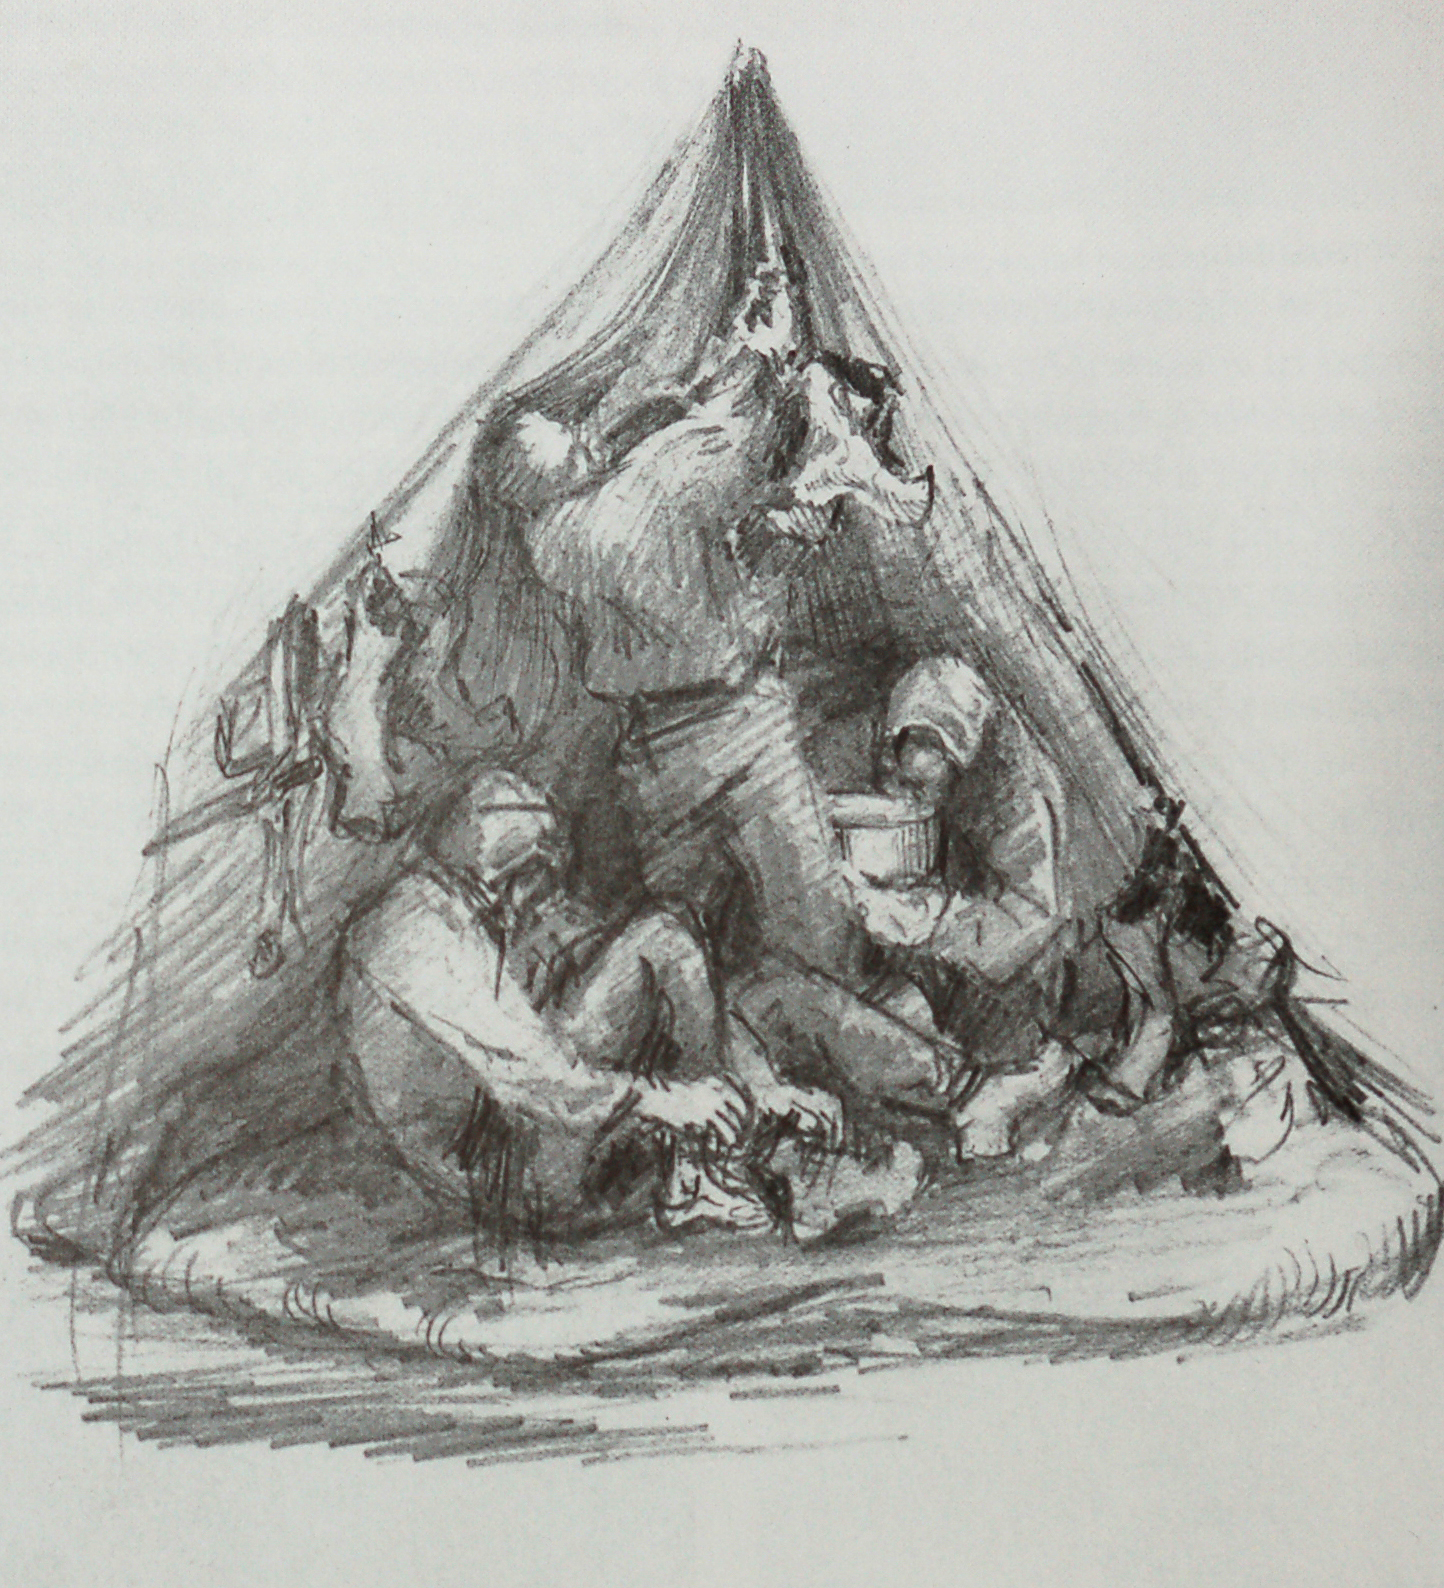 Crowded Tent